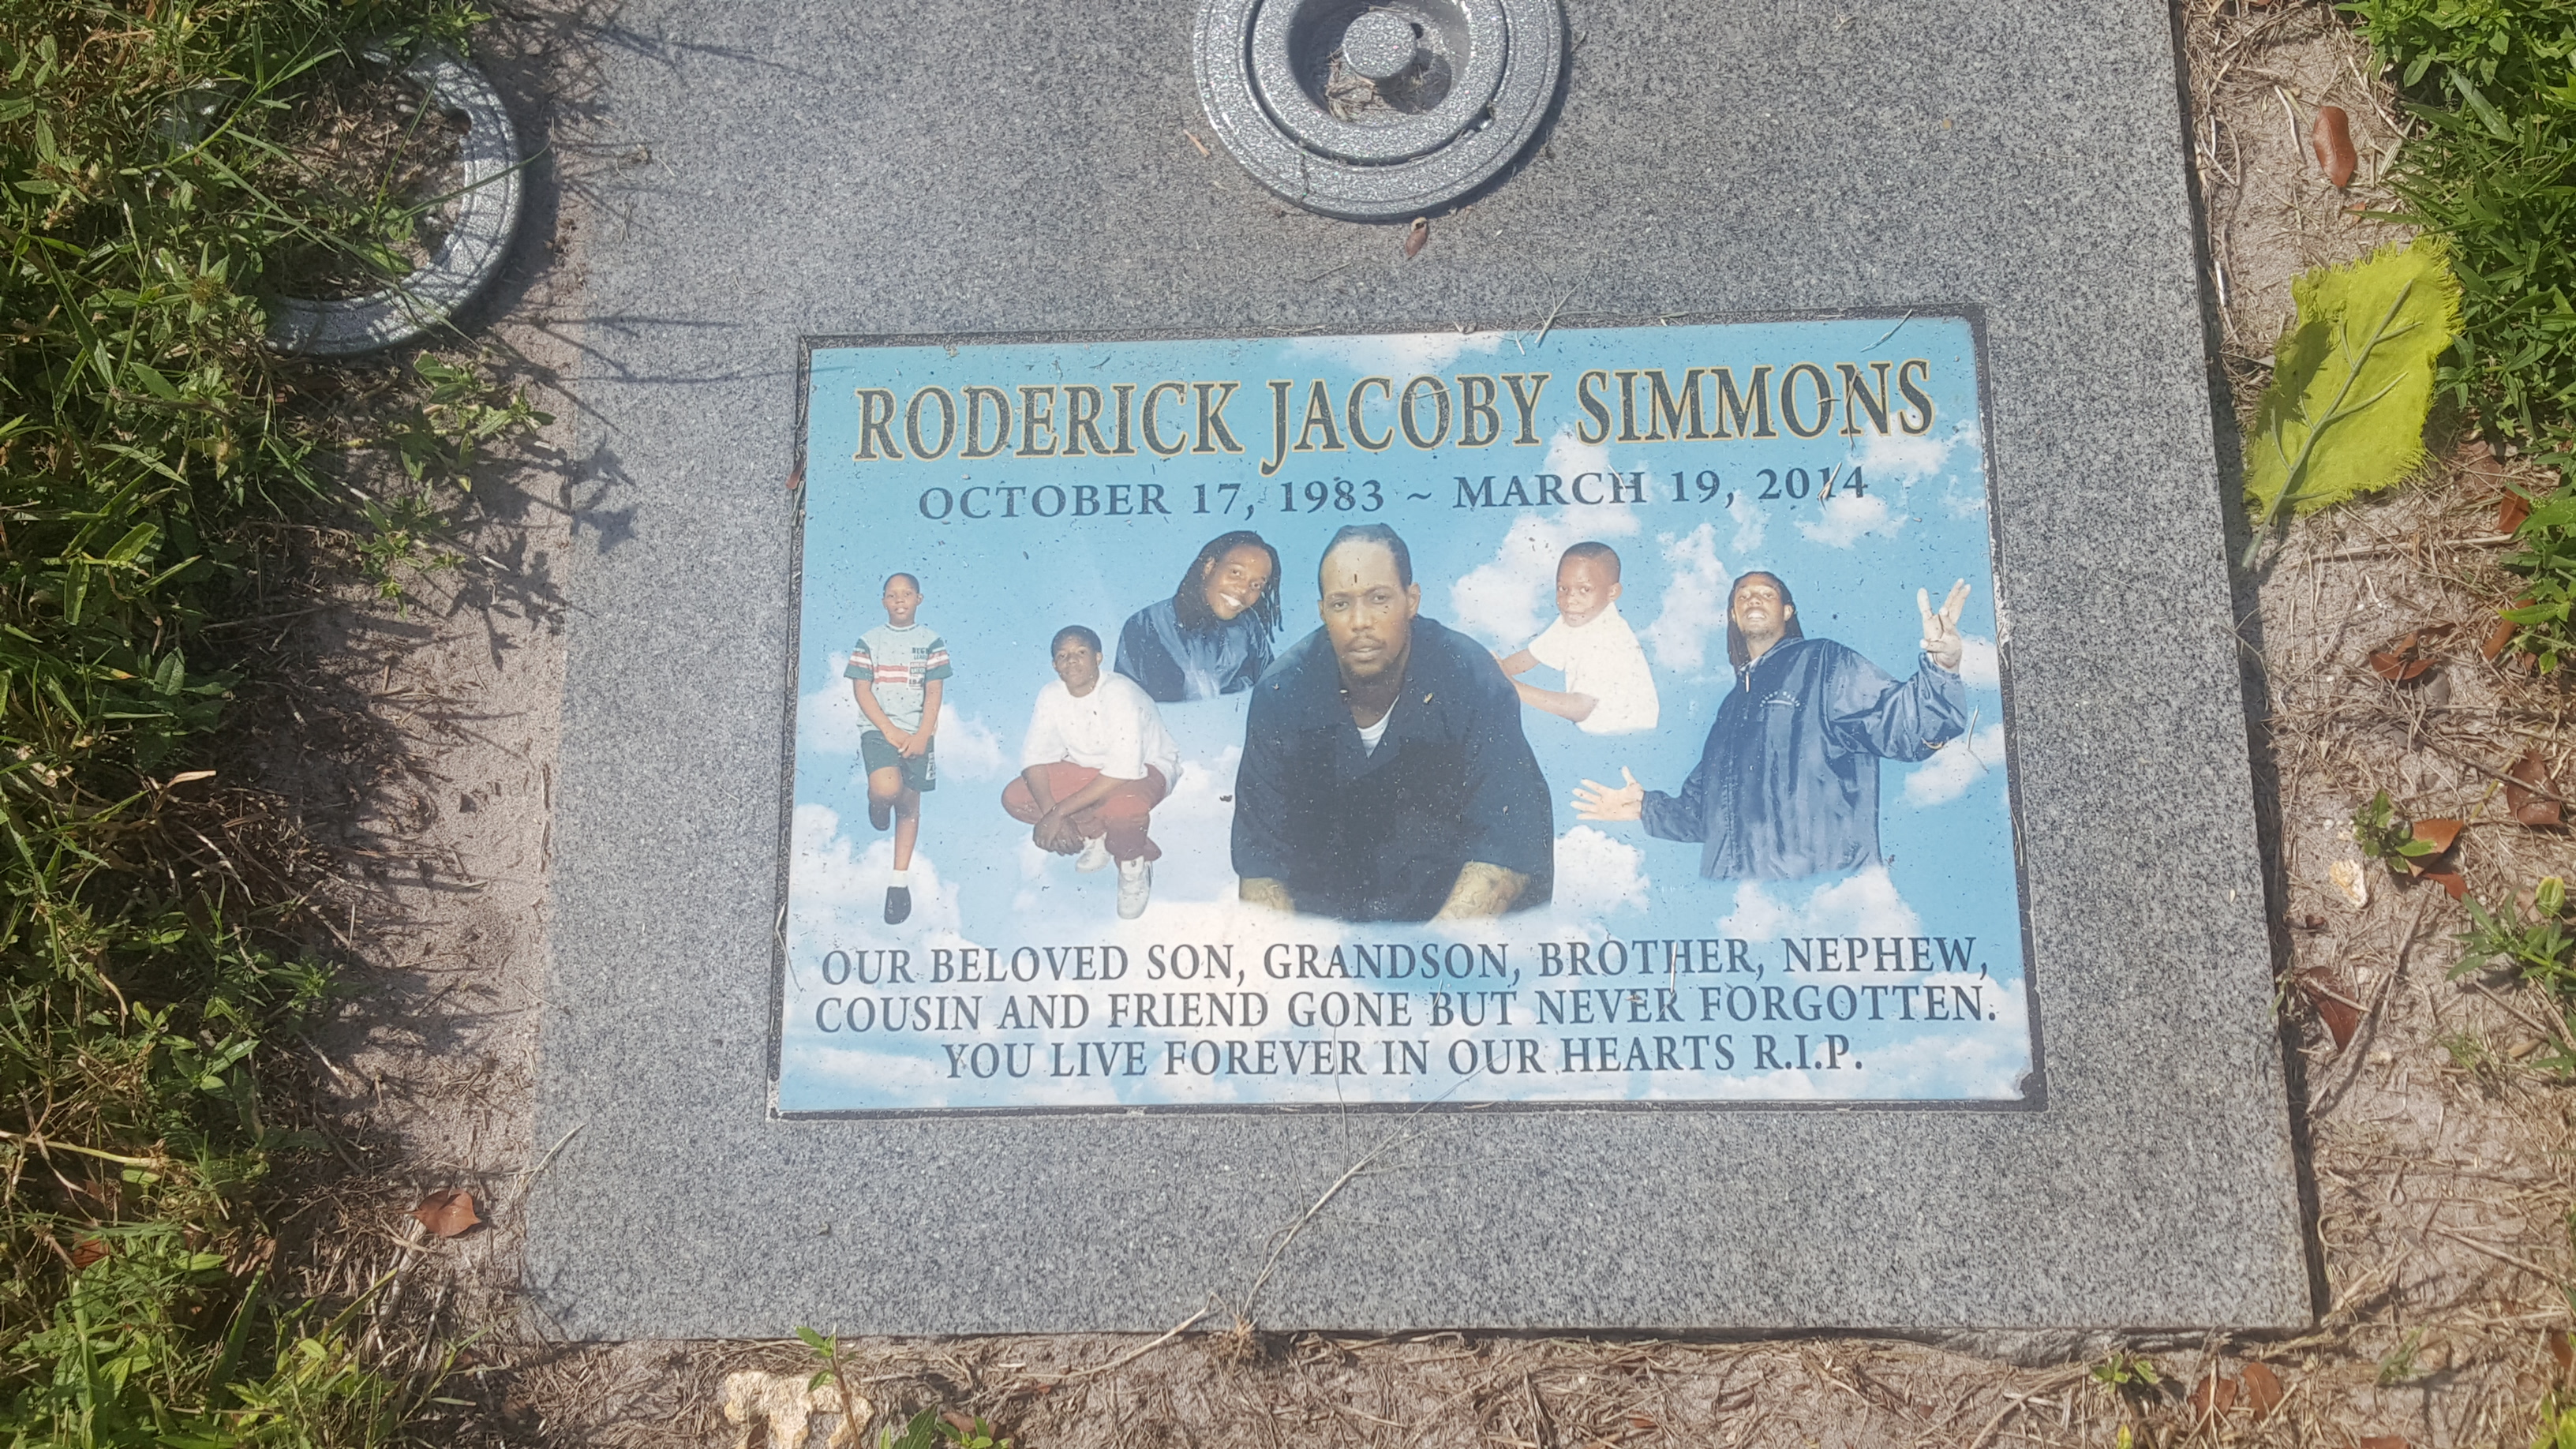 Roderick Jacoby Simmons